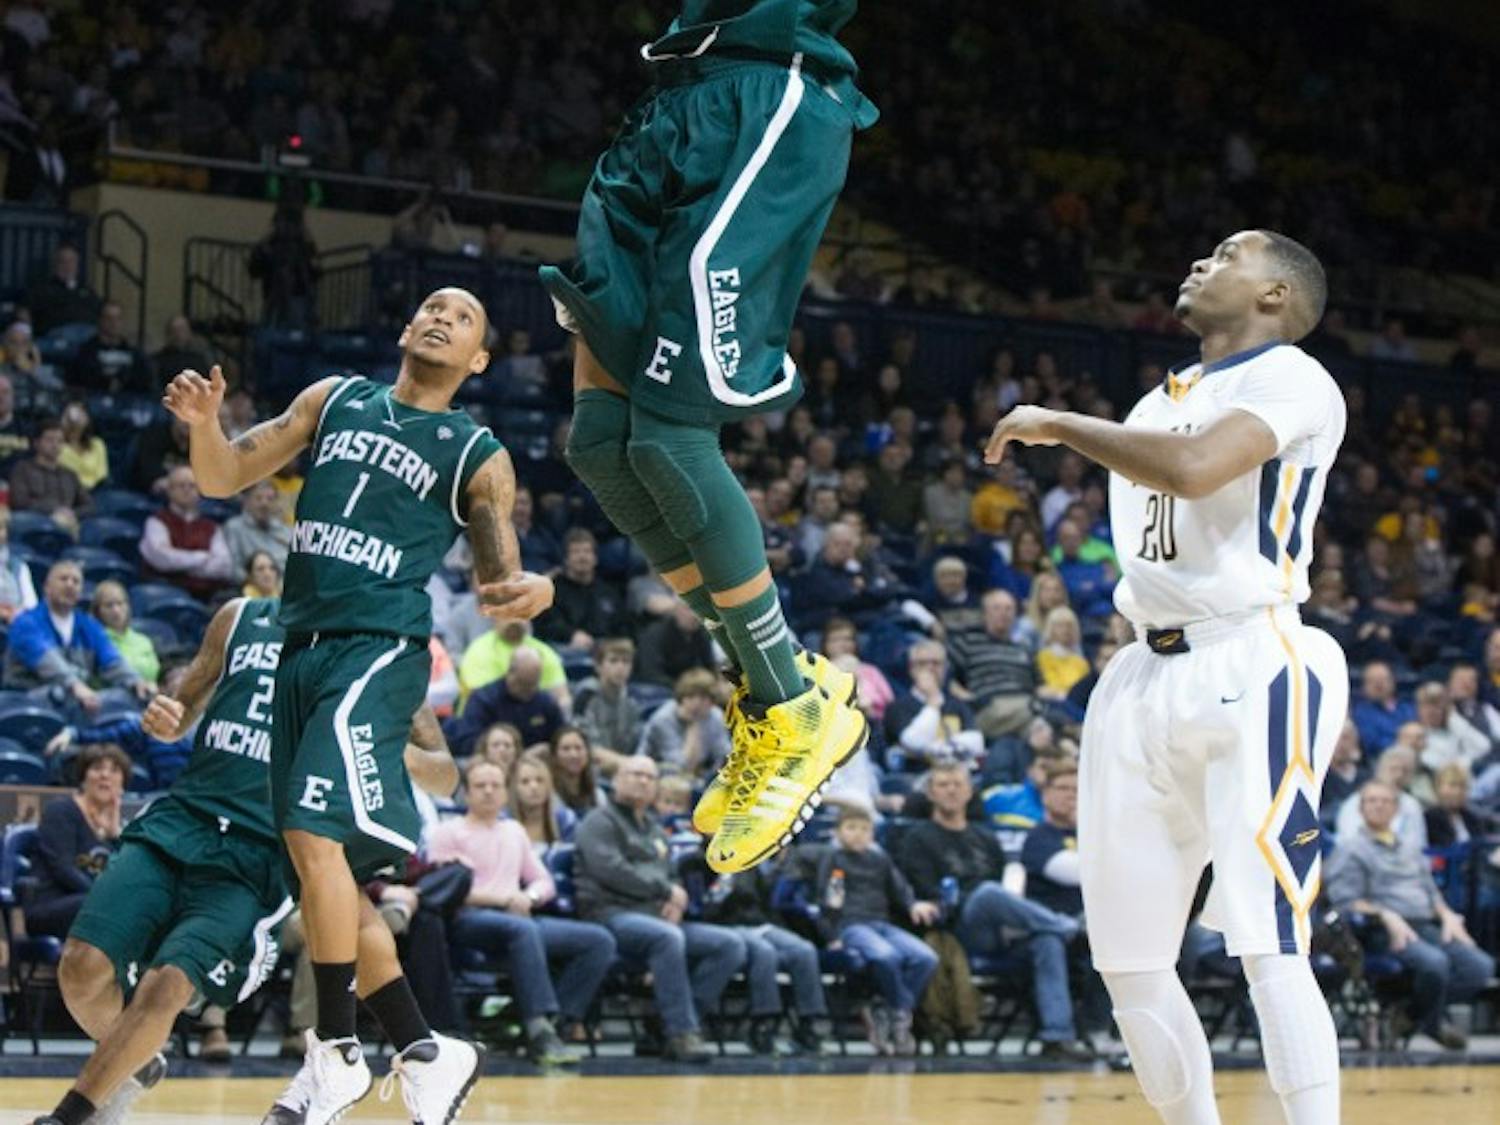 Eastern Michigan forward Karrington Ward (14) goes in for the layup in the Eagles 77-66 loss to Toledo Saturday afternoon.